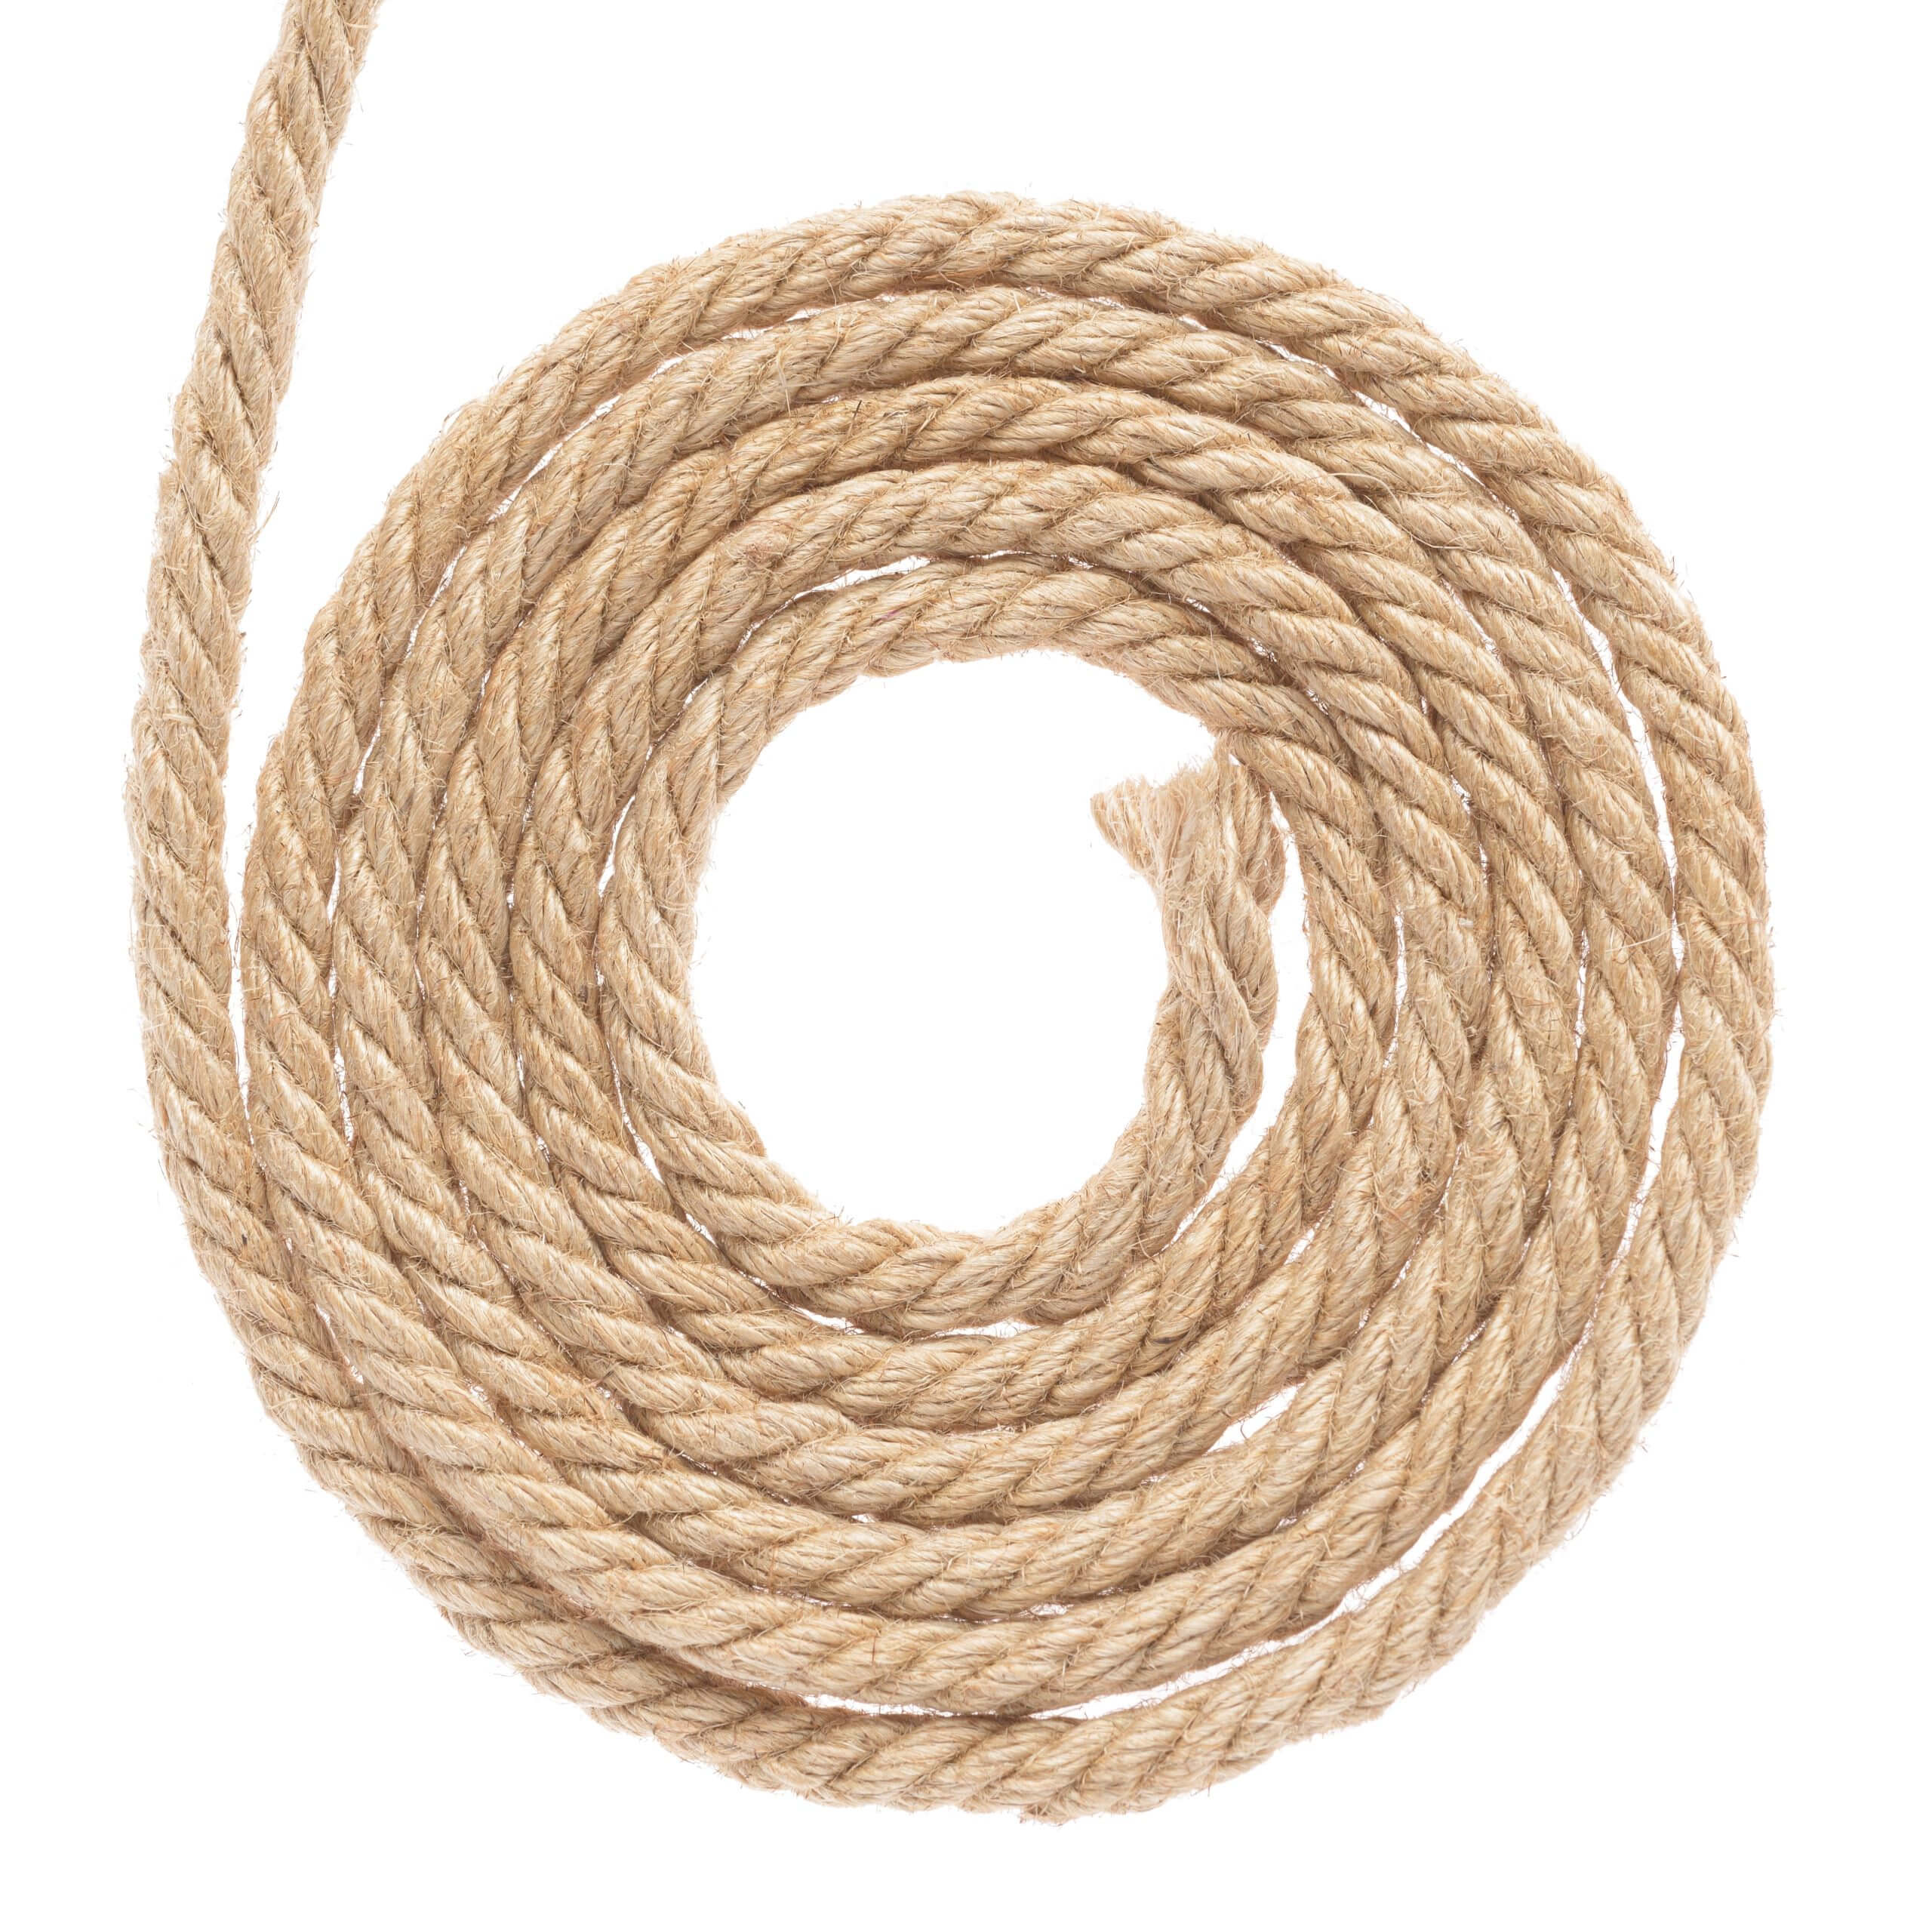 an image of some Rope.